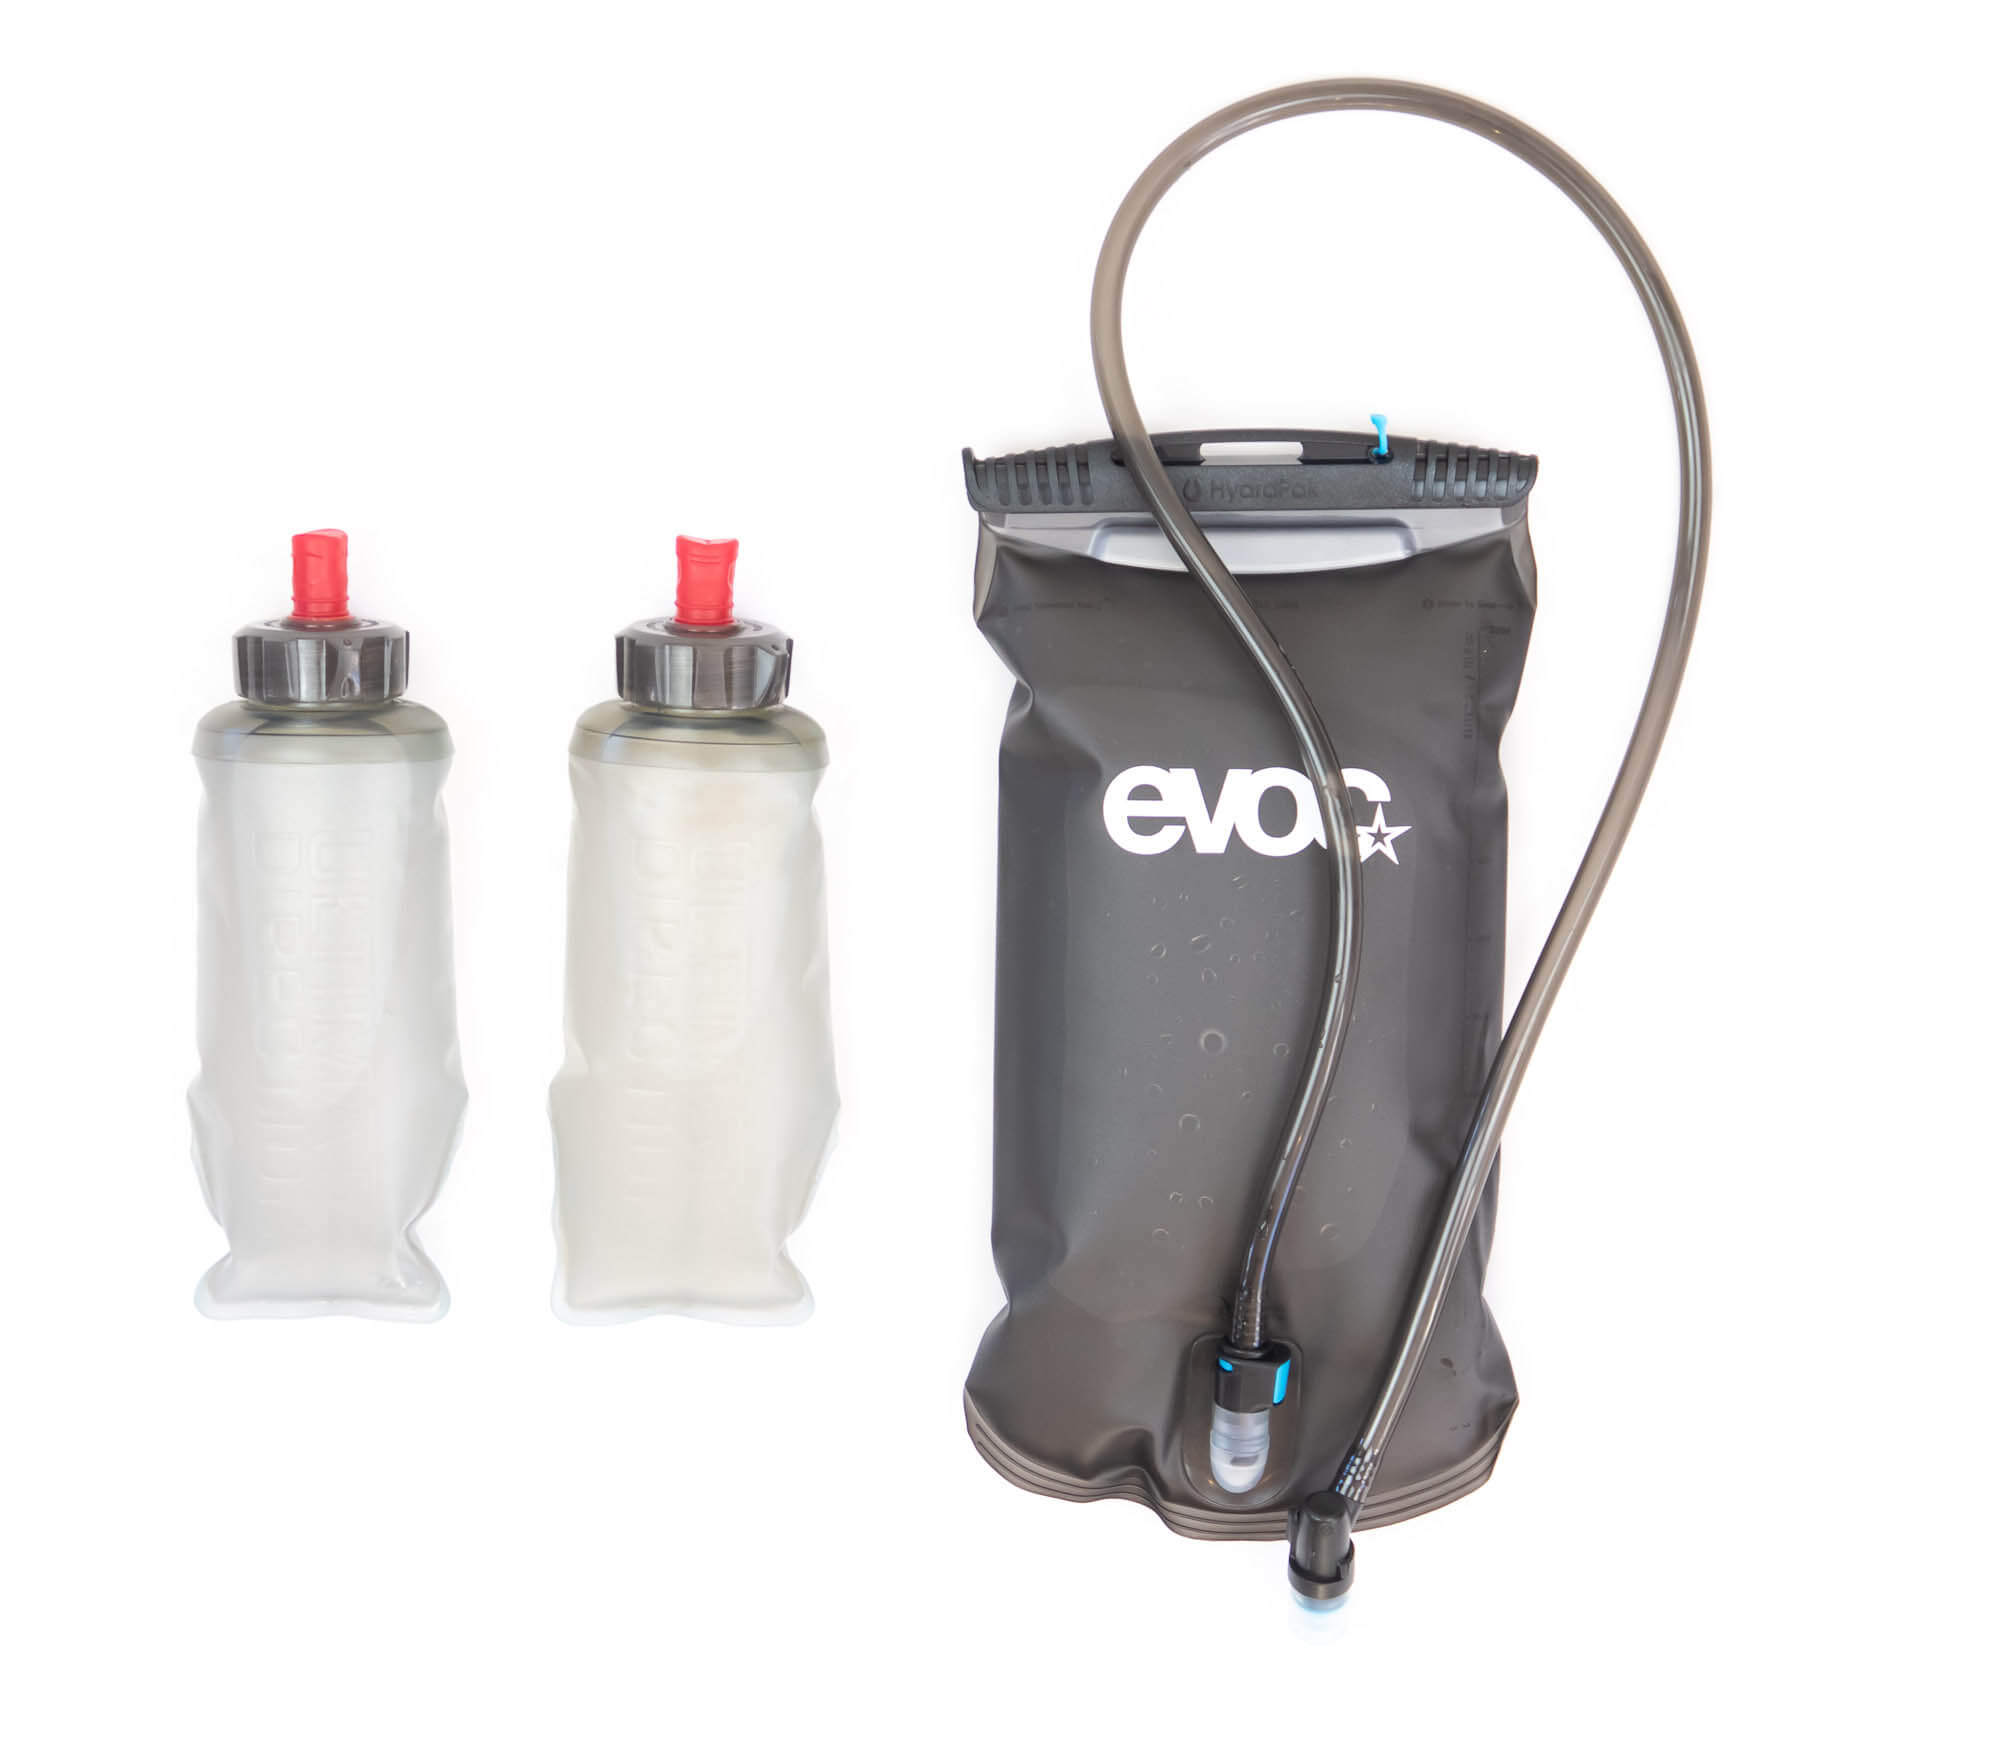 hydration reservoir and water bottles